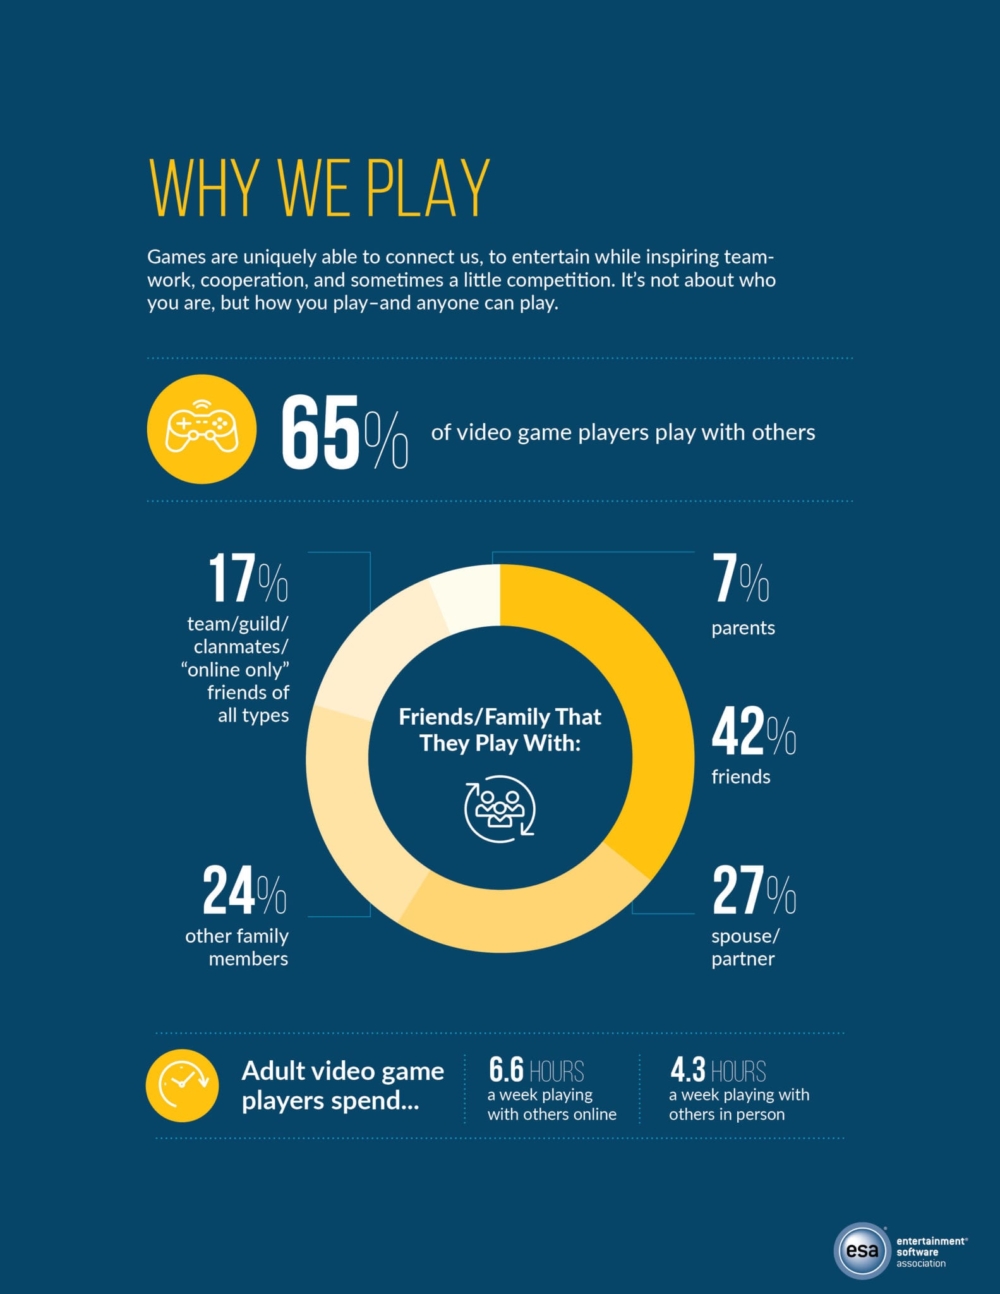 Graphic showing facts about who people play video games with and how much of video games are spent playing in-person or virtually with others.